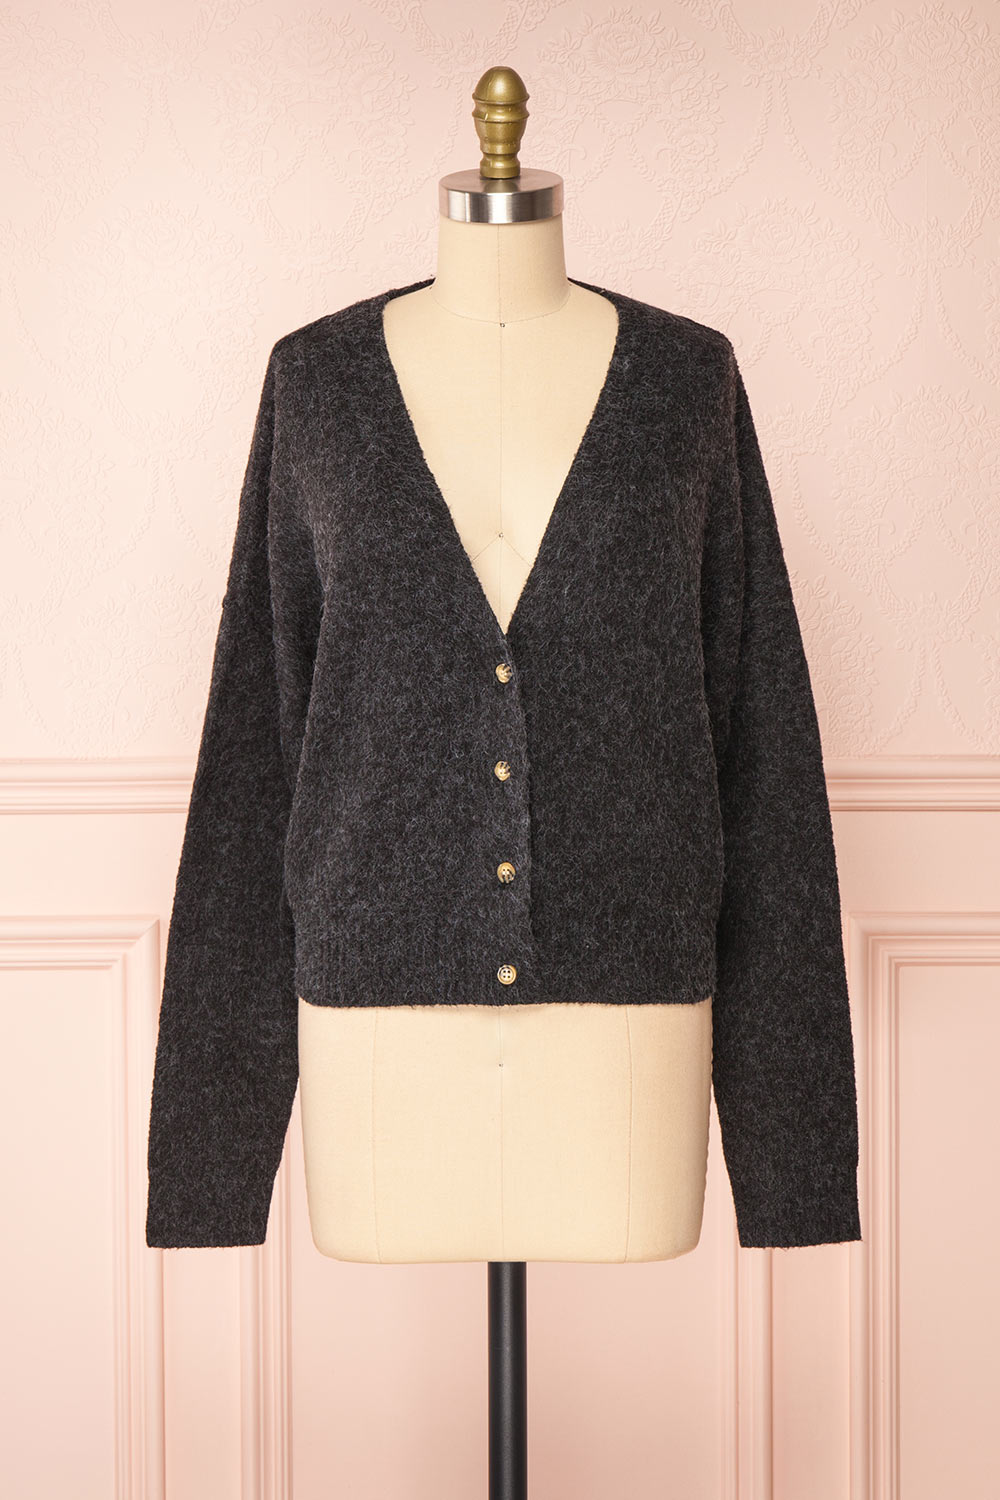 Vikep Black Knitted Button-Up Cardigan | Boutique 1861 front view 